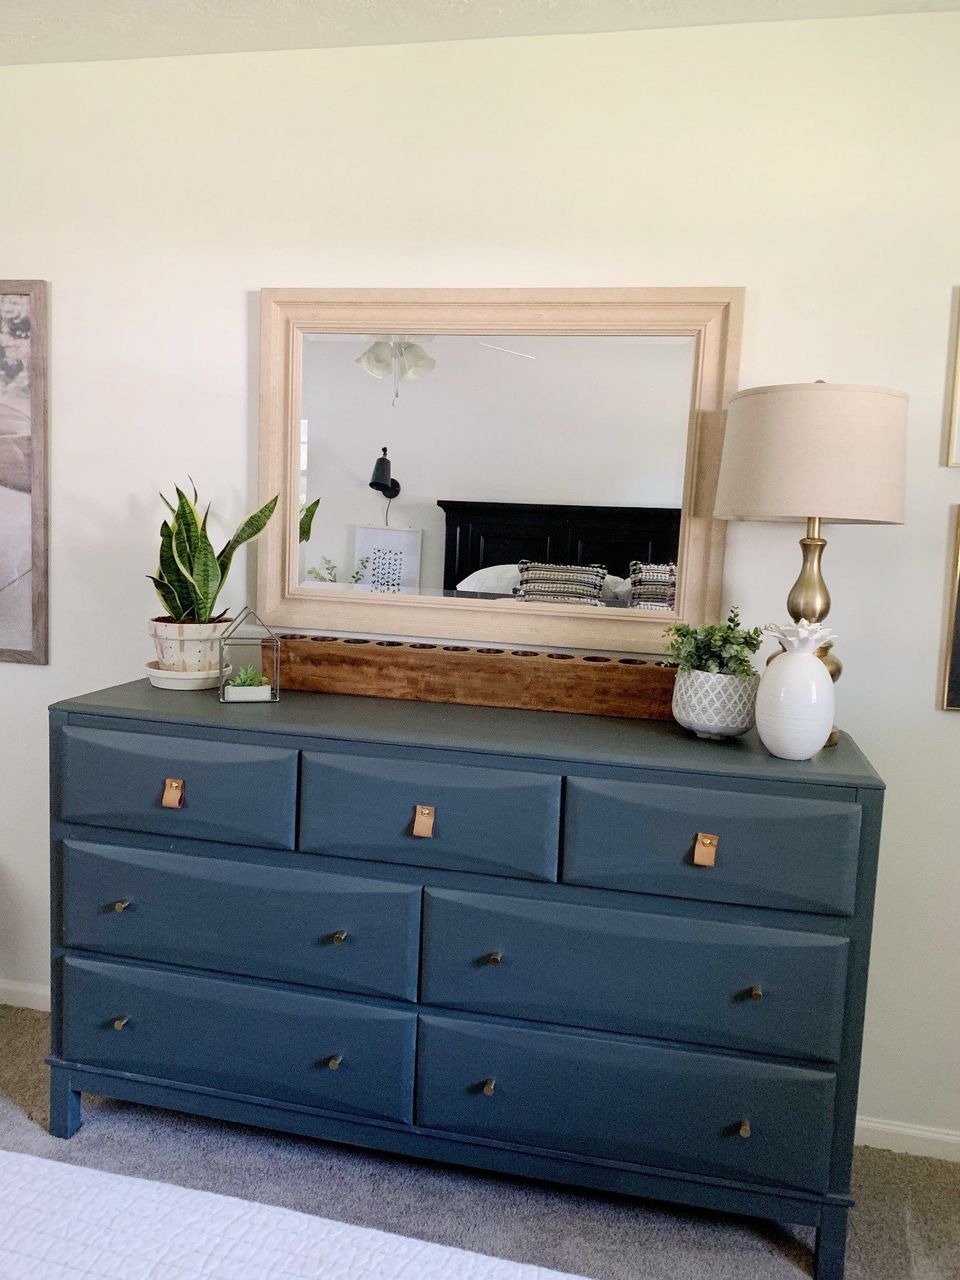 diy leather drawer pulls mixed with gold knobs on painted dark gray dresser in white bedroom